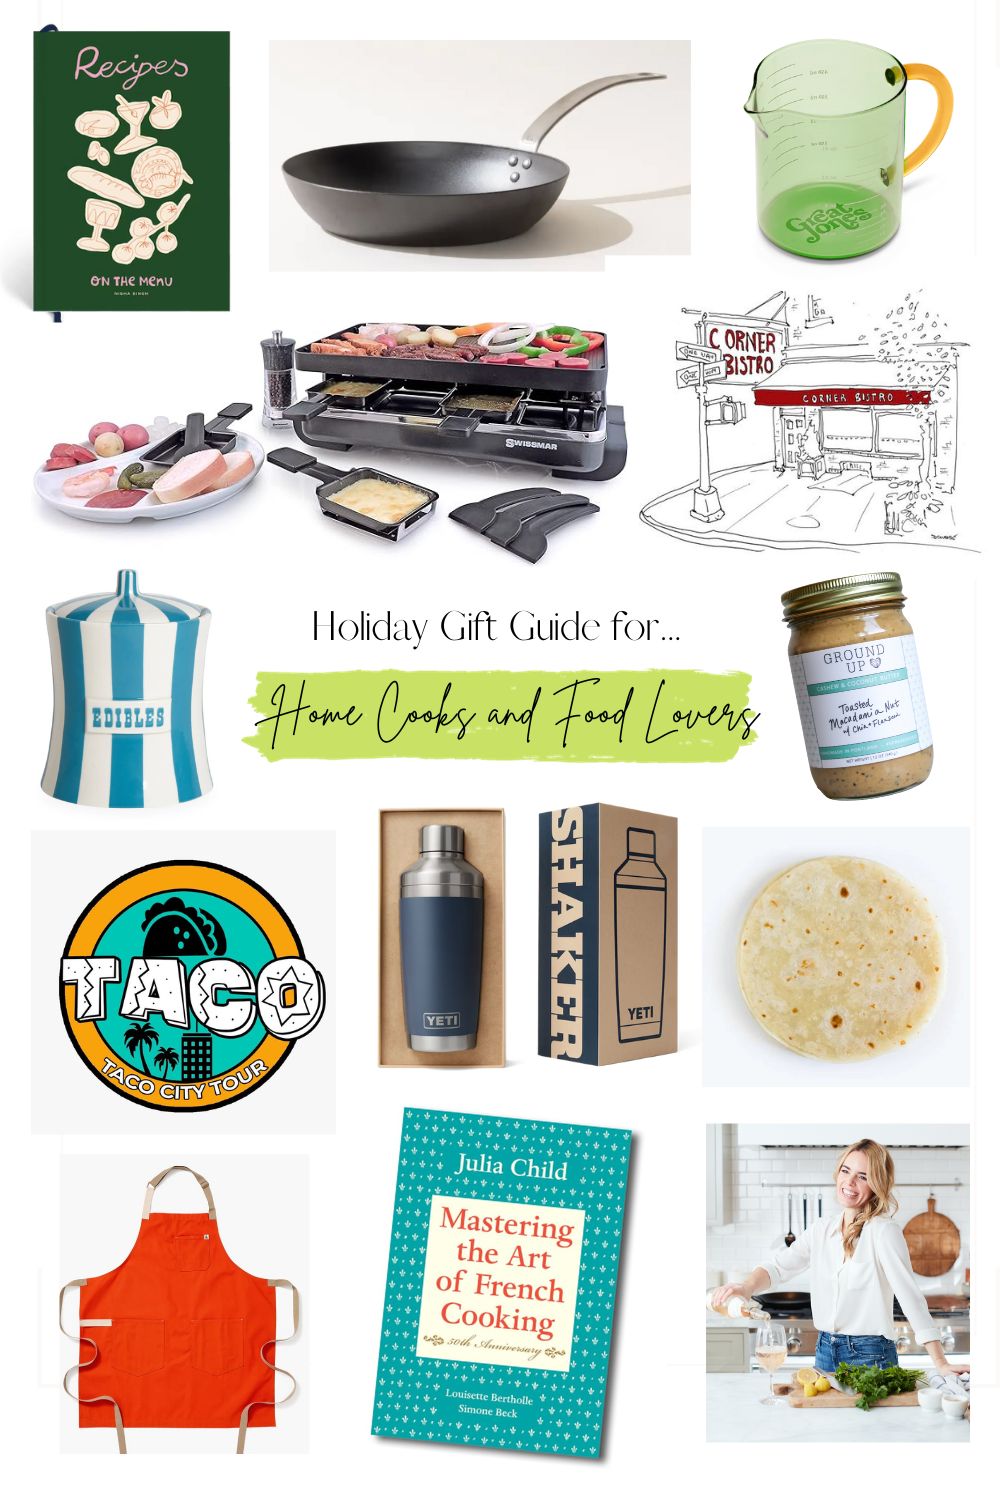 Gift Guide for Home Cooks - Tastes Better From Scratch